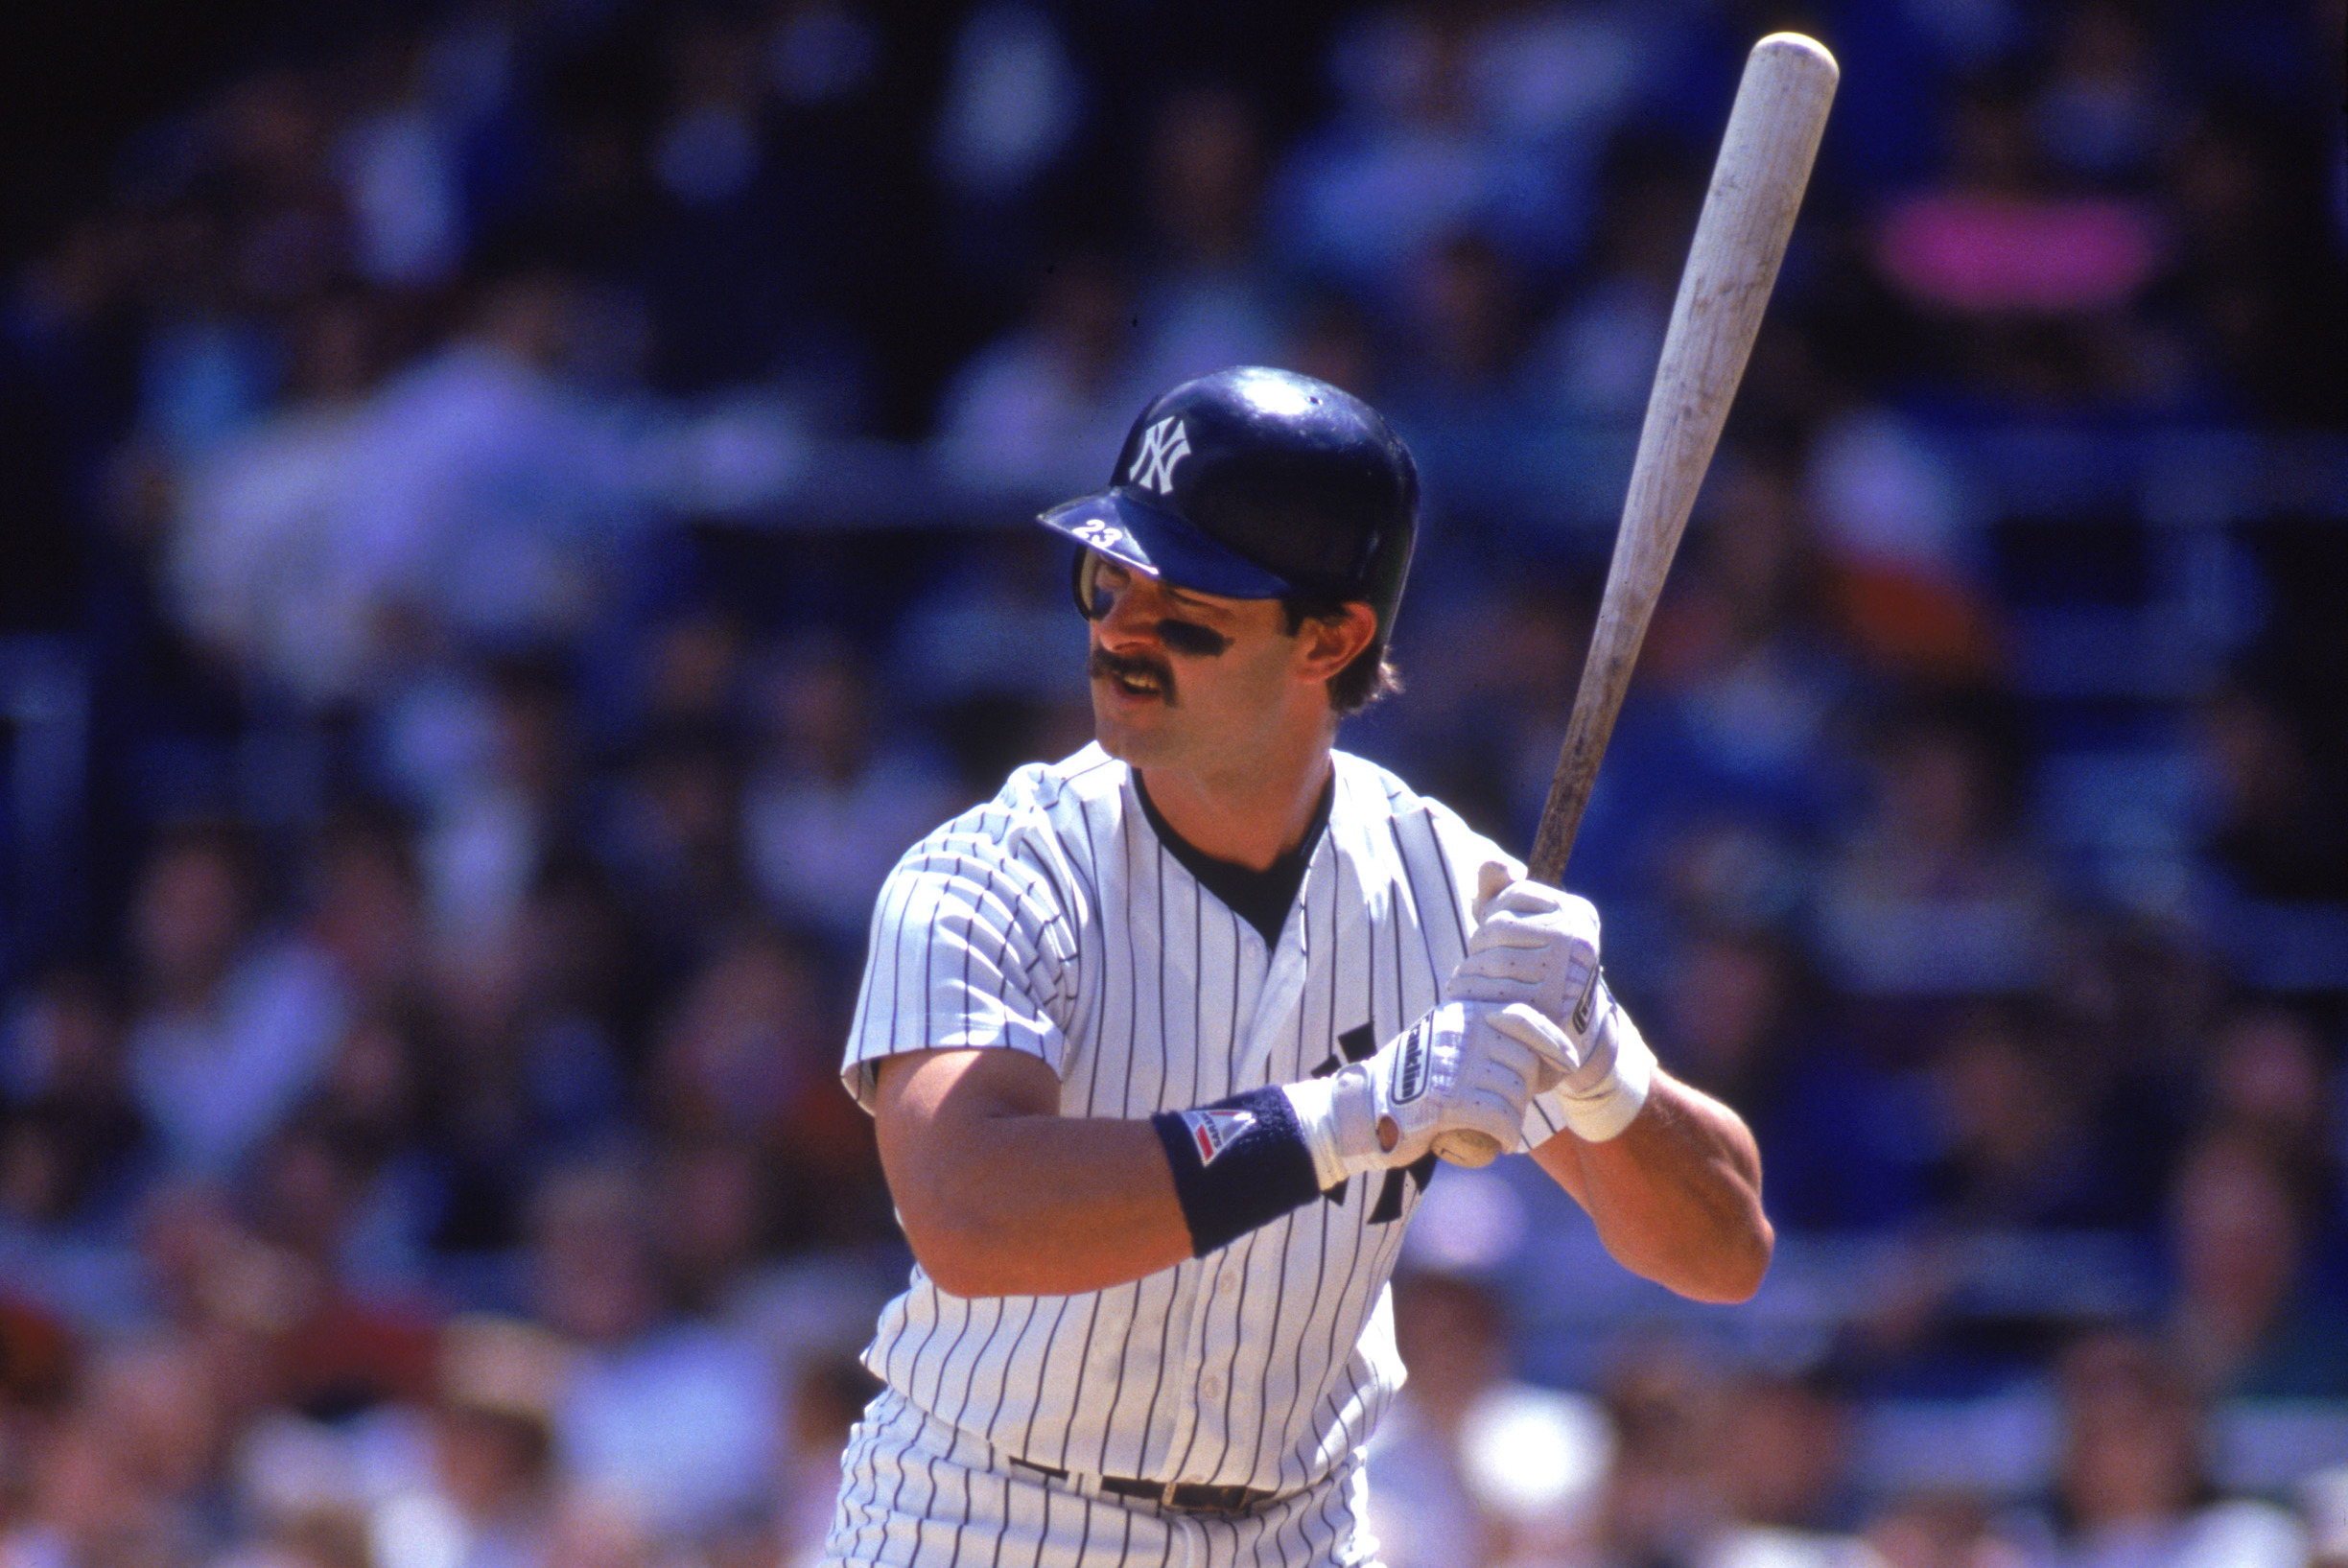 Yankees and Don Mattingly formed one fan's love of baseball